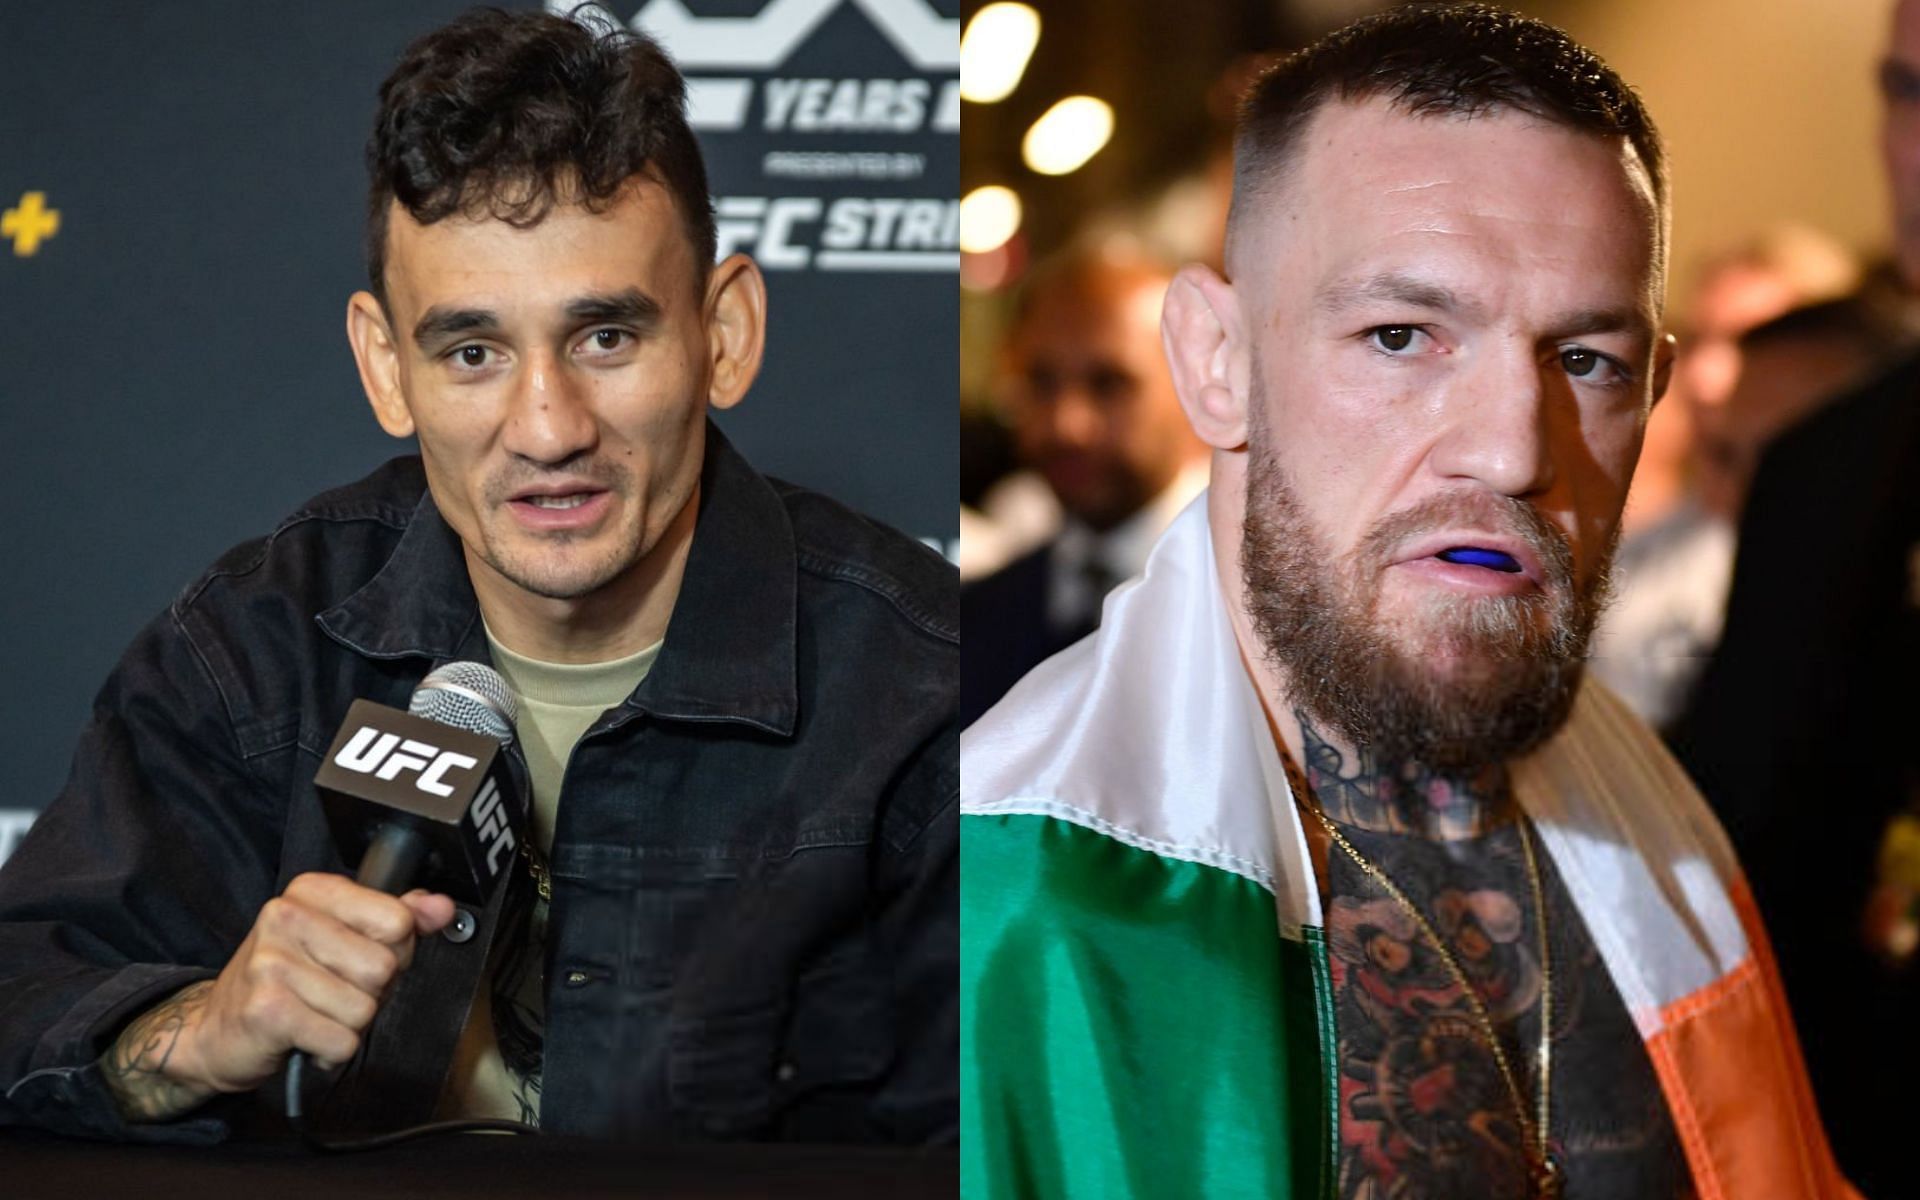 Max Holloway (left) and Conor McGregor (right) [Images Courtesy: @GettyImages]